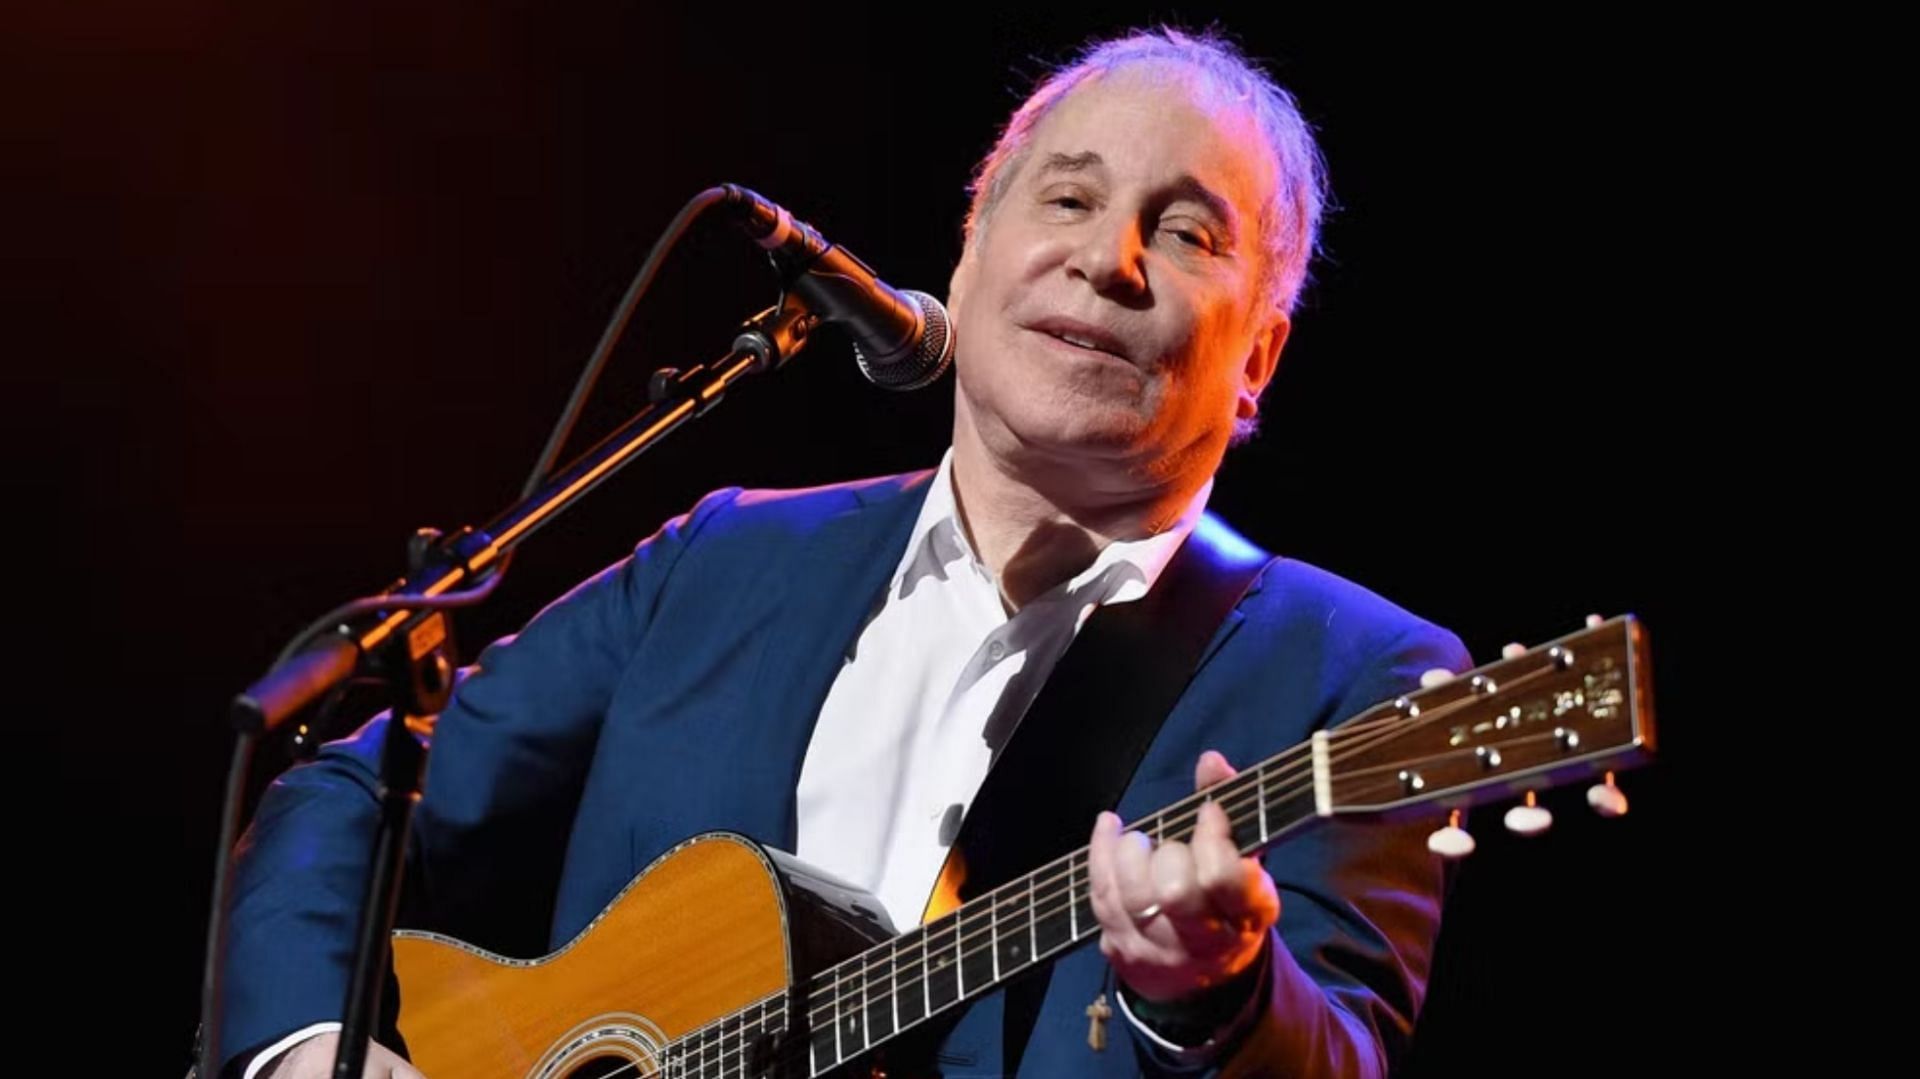 Paul Simon tribute concert Where to watch, list of performers and all